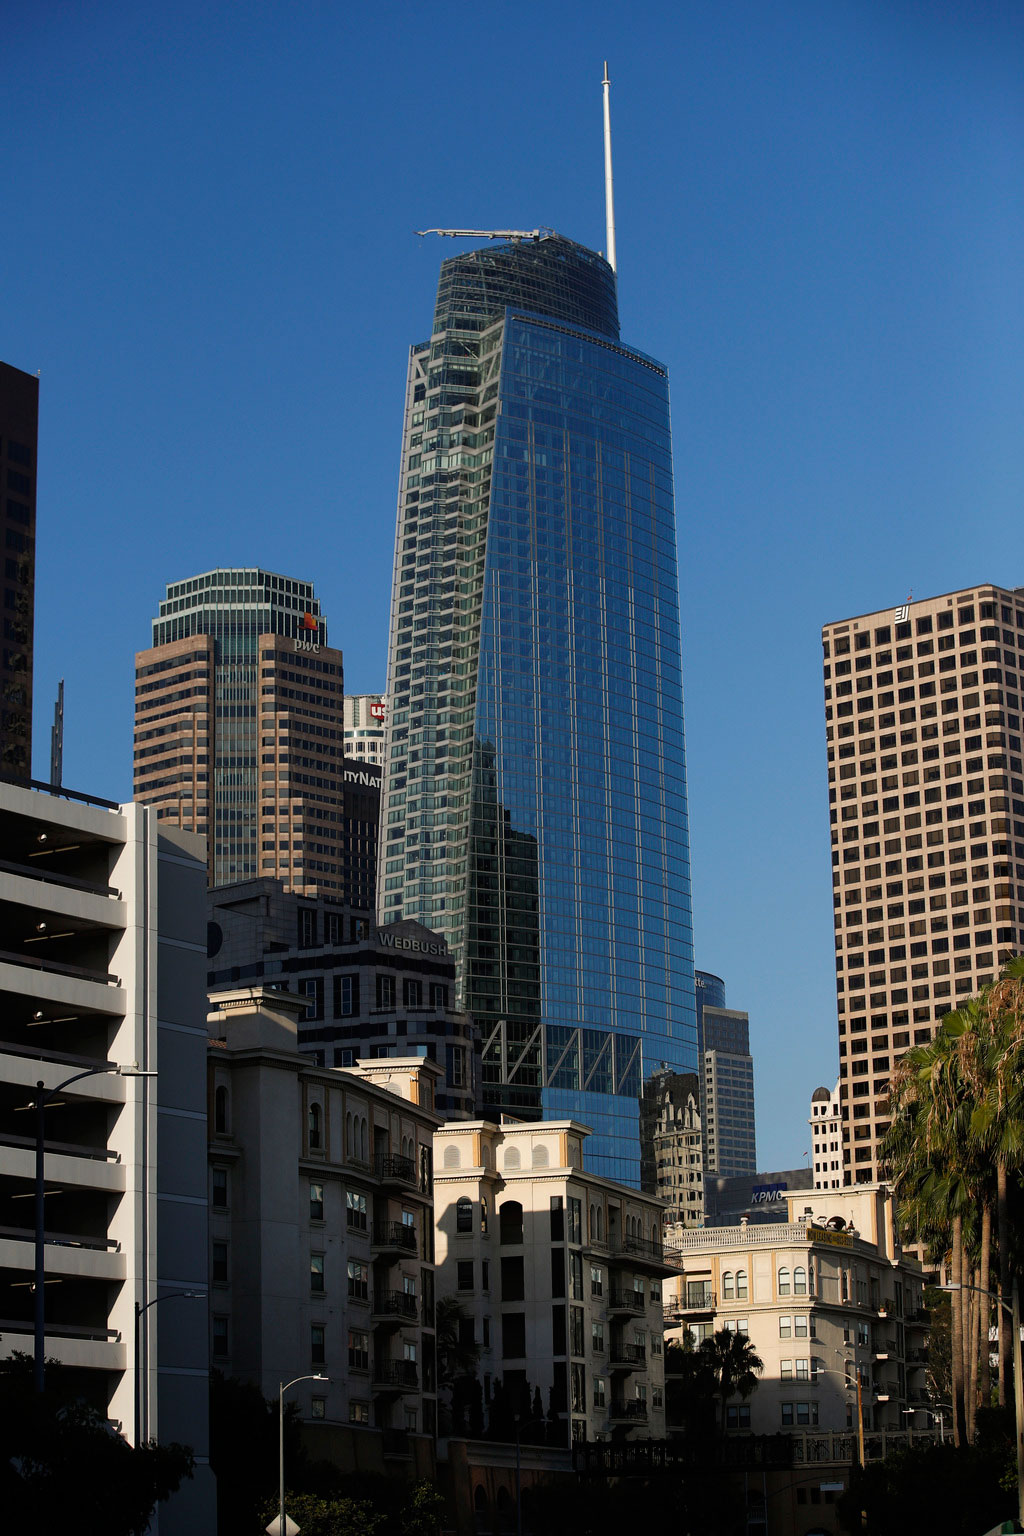 Wilshire-Grand-Center Which are the best looking Los Angeles skyscrapers?